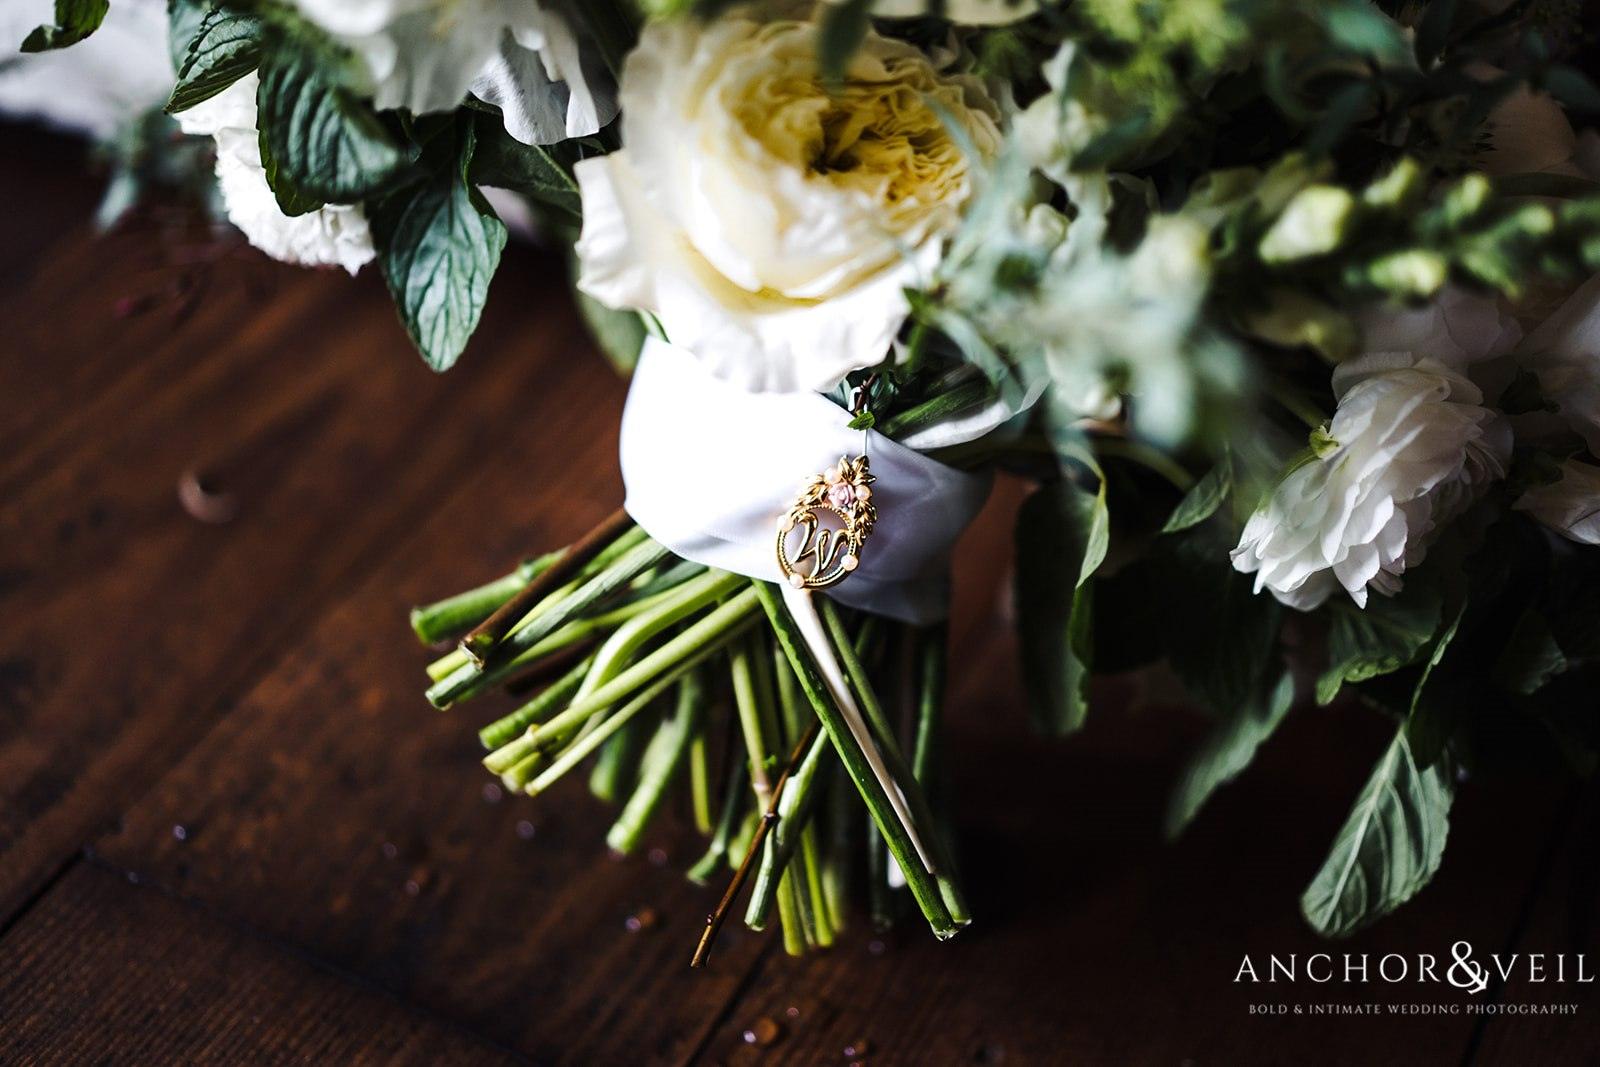 The special details on the bride's bouquet at the William Aiken House Wedding